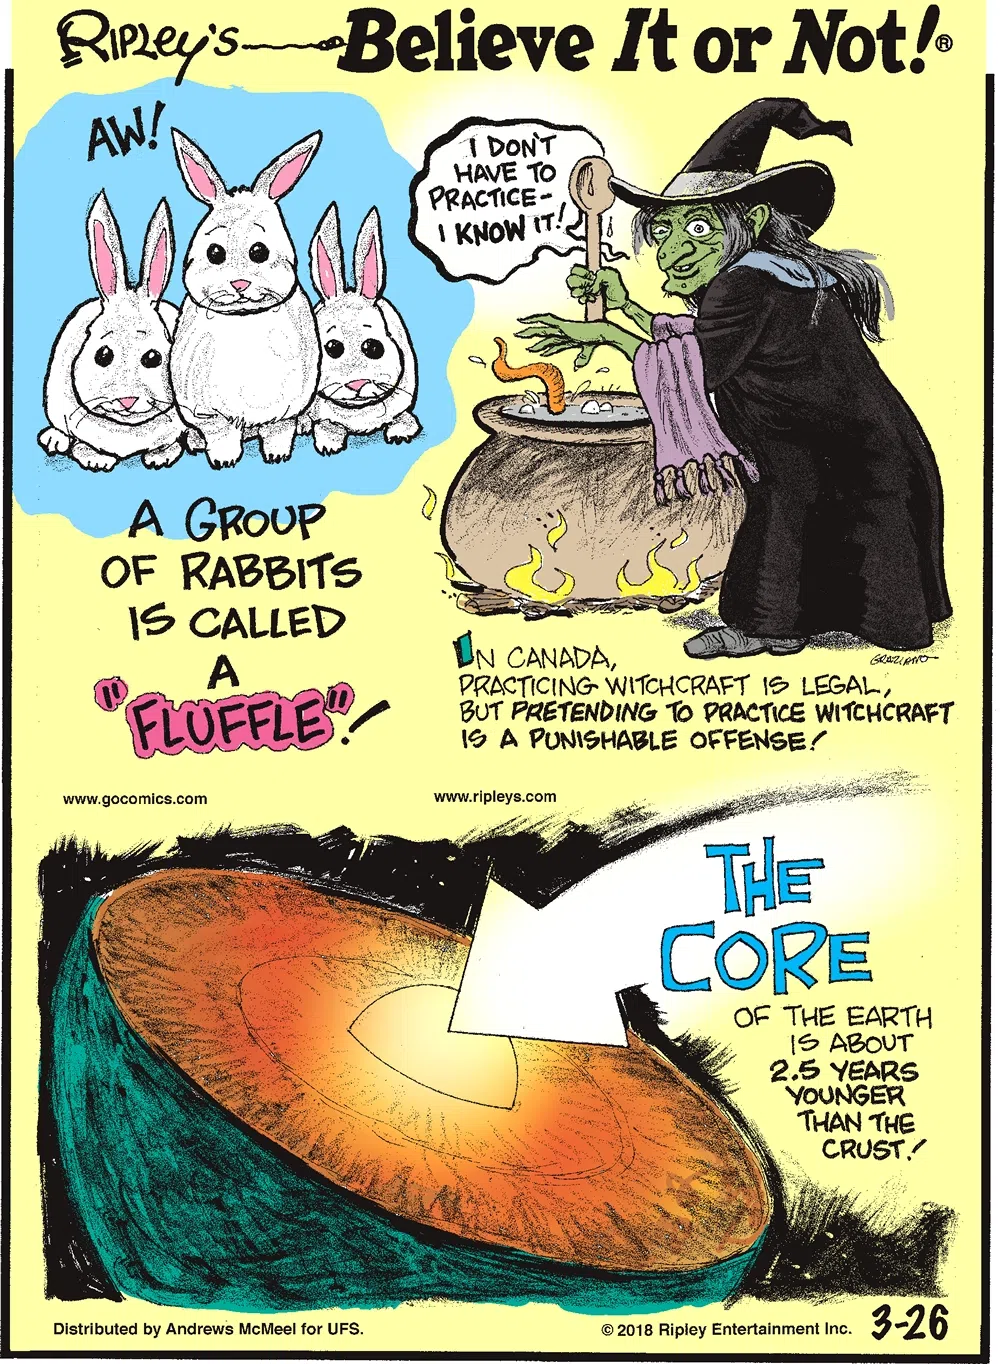 A group of rabbits is called a "fluffle"!-------------------- In Canada, practicing witchcraft is legal, but pretending to practice witchcraft is a punishable offense!-------------------- The core of the Earth is about 2.5 years younger than the crust!